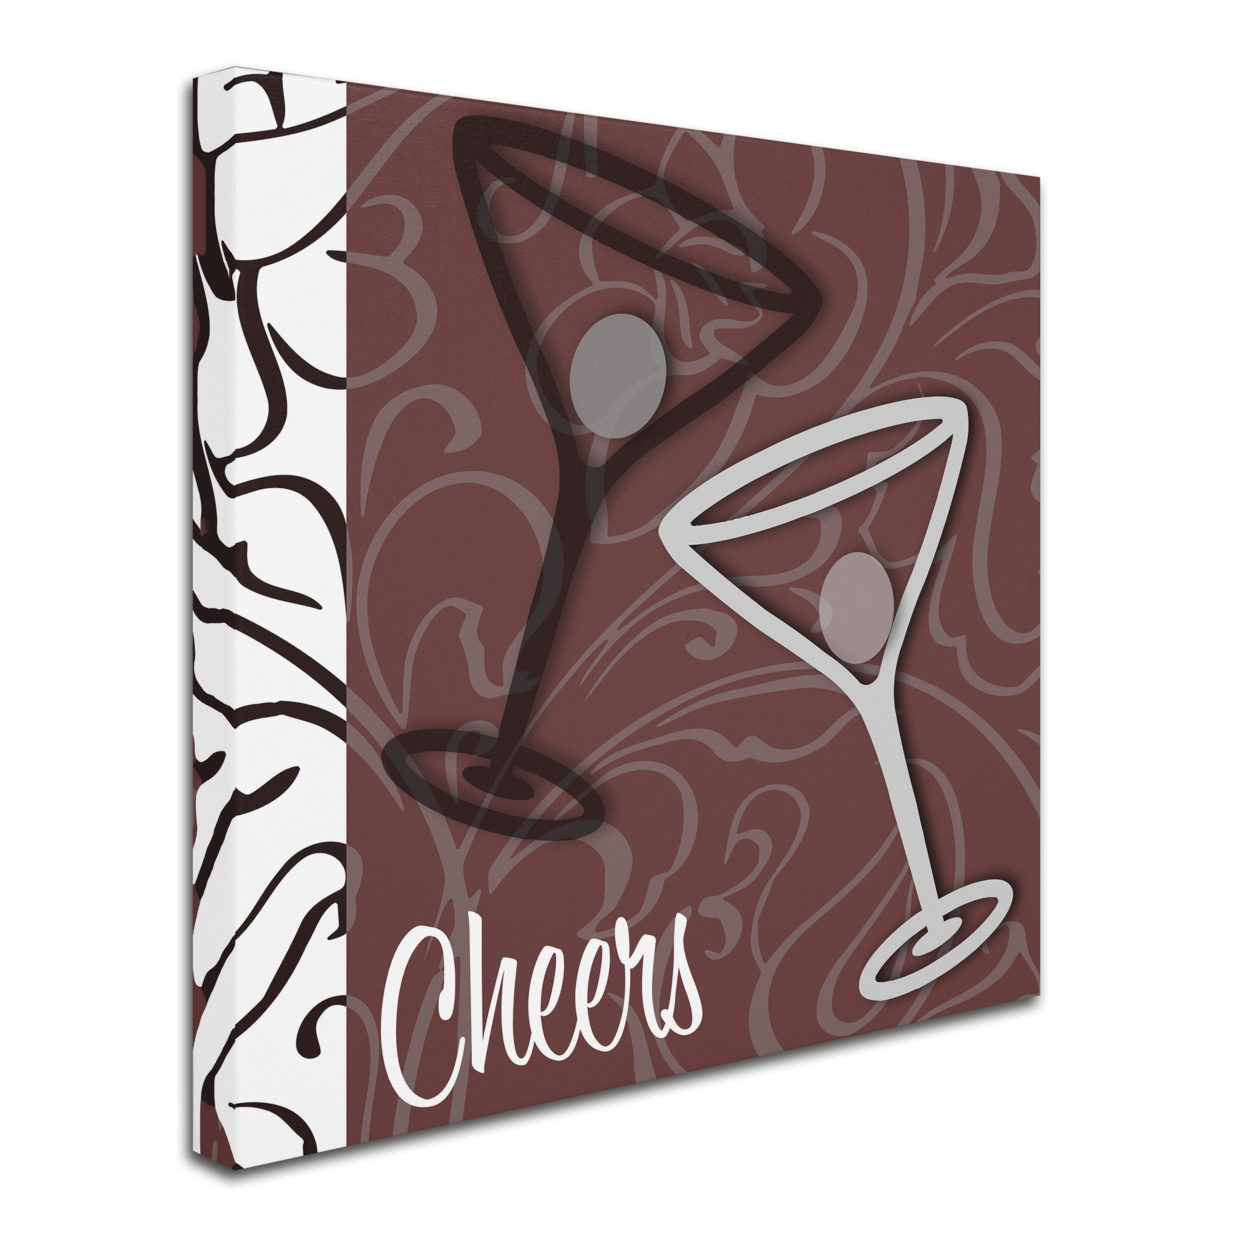 Color Bakery 'Cheers I' Huge Canvas Art 35 X 35